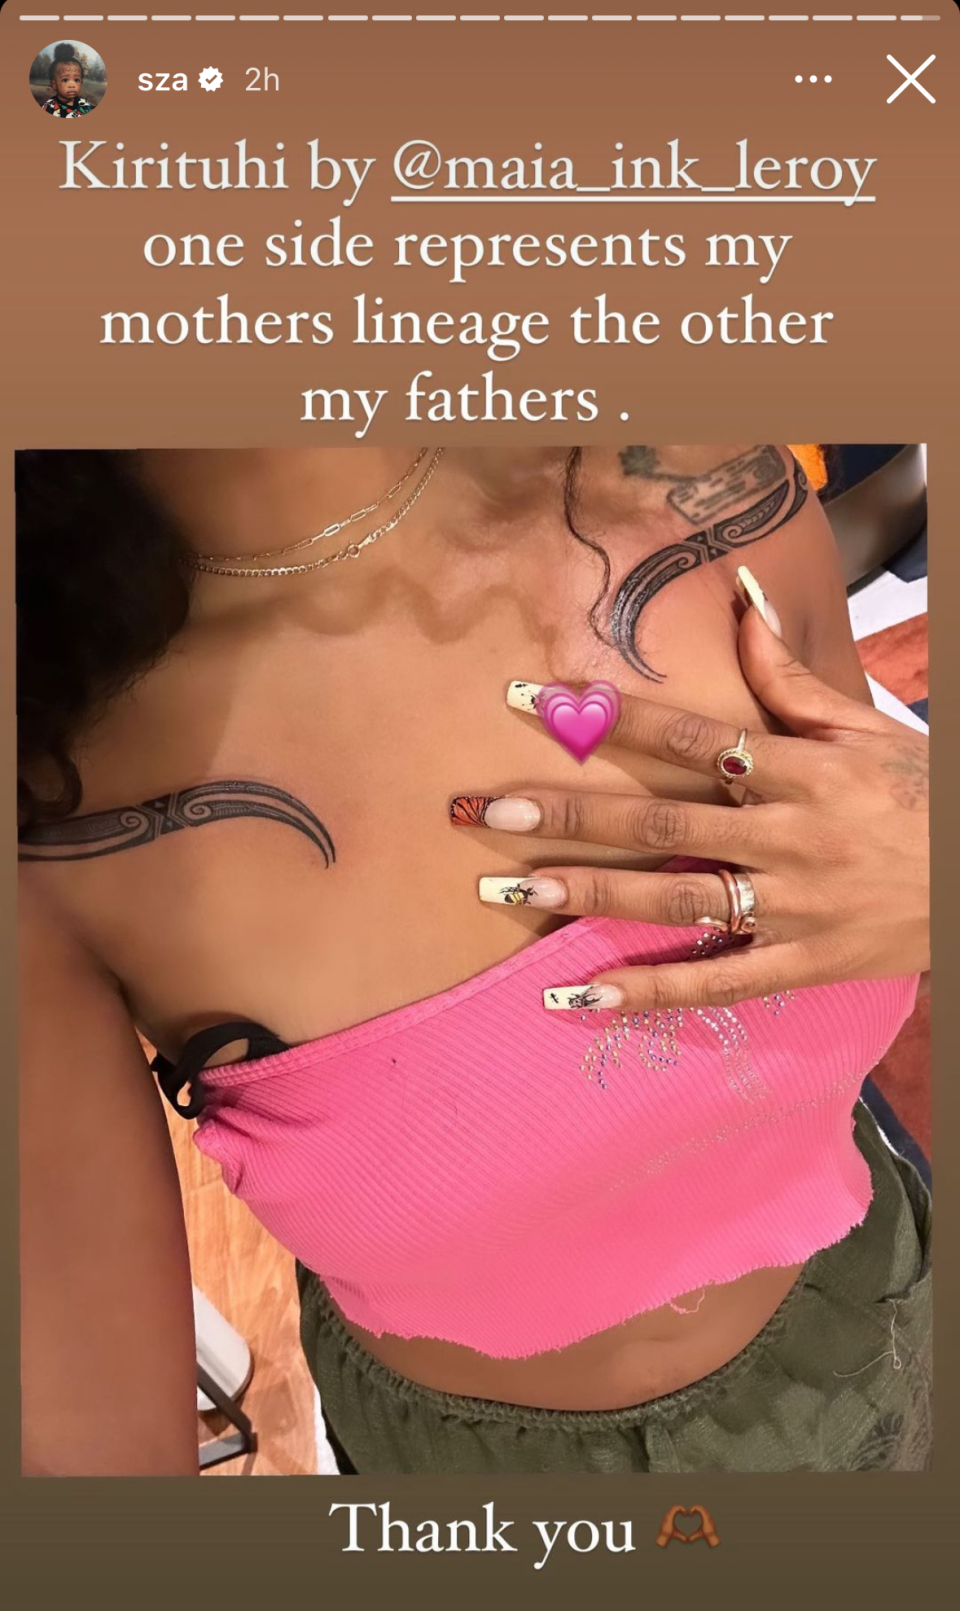 <h1 class="title">SZA Got “Kirituhi” Tattoos to Honor Her Family While in New Zealand — See Photos</h1><cite class="credit">Courtesy of SZA/Instagram @SZA</cite>